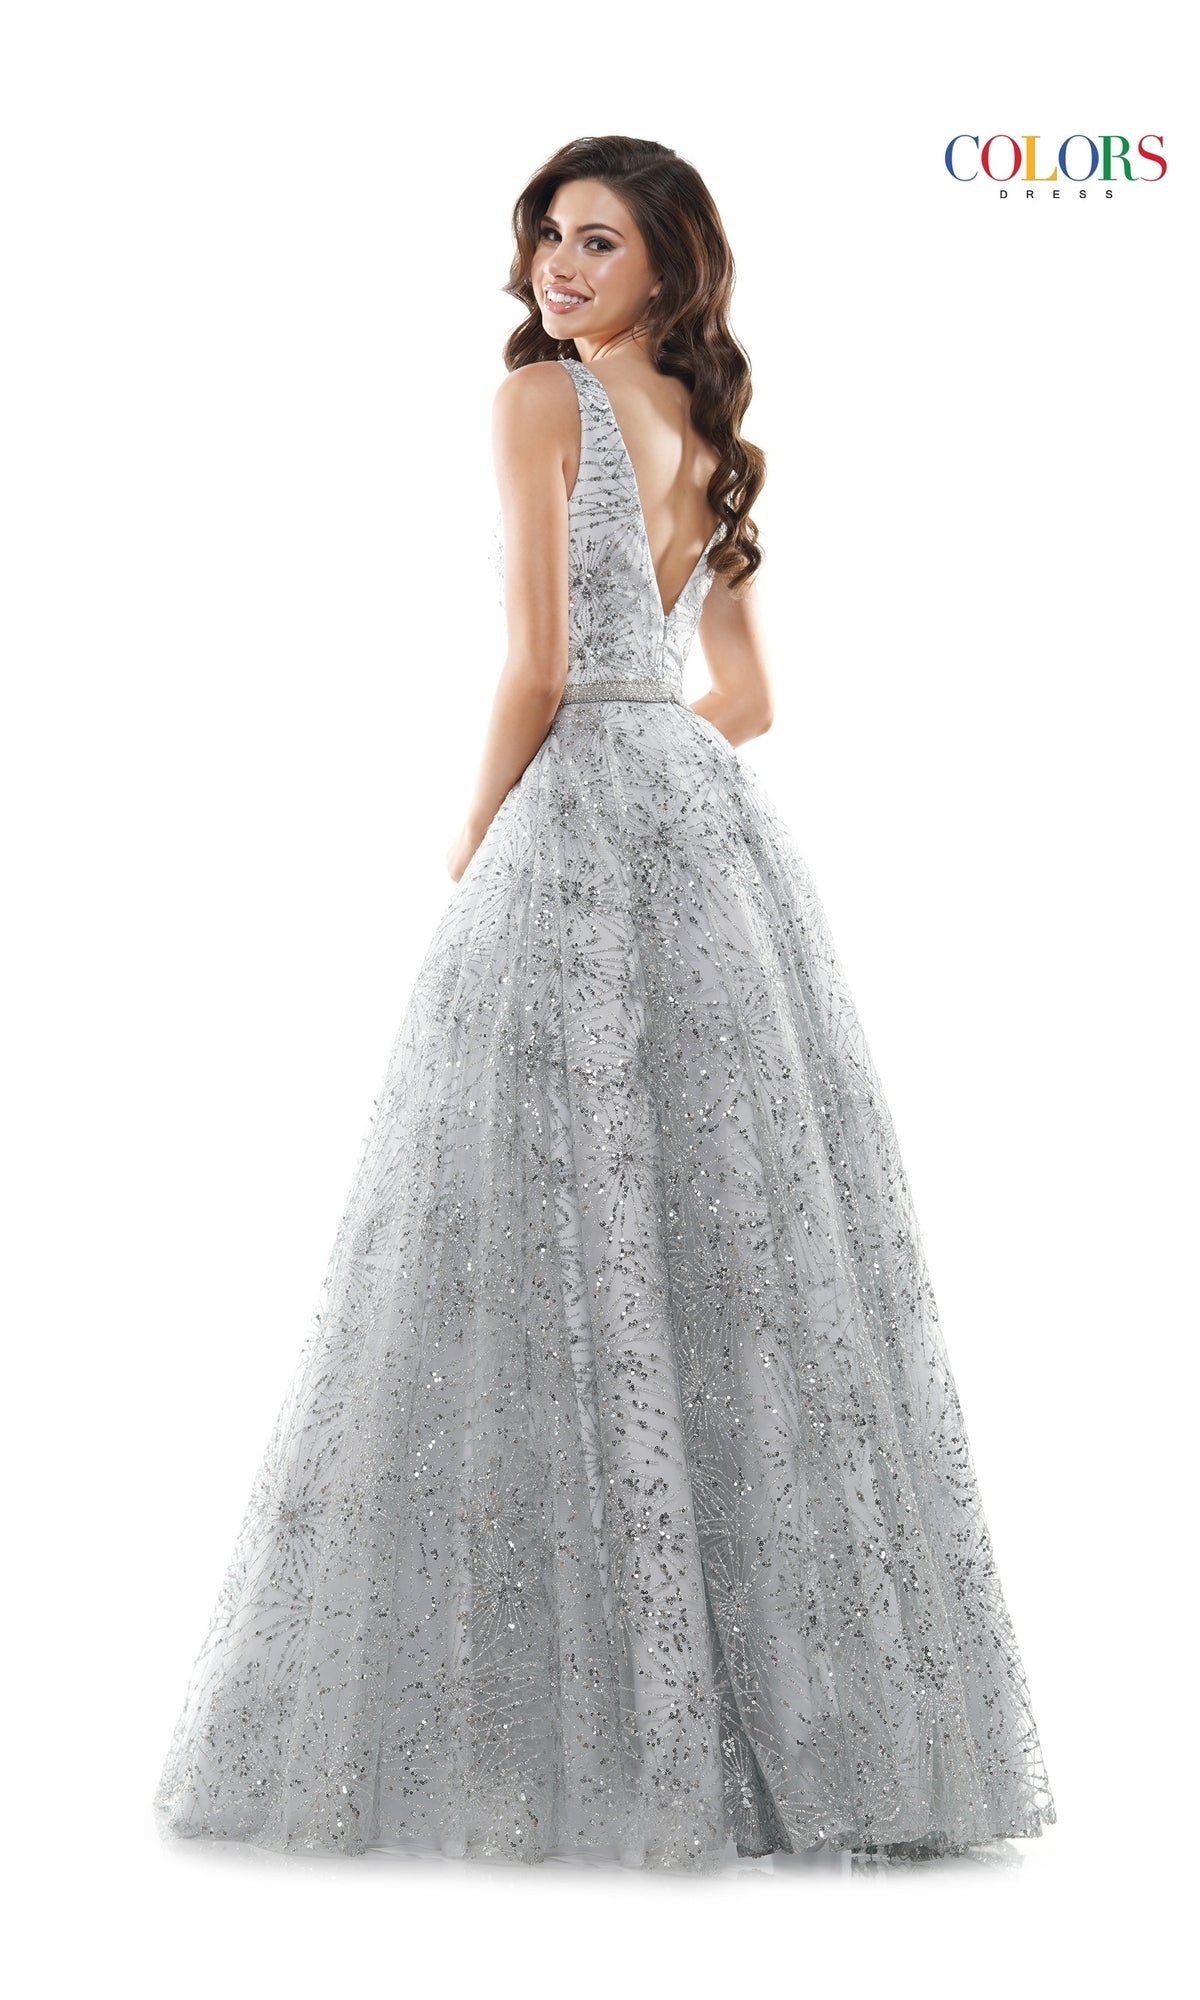 Long Prom Dress G942 by Colors Dress